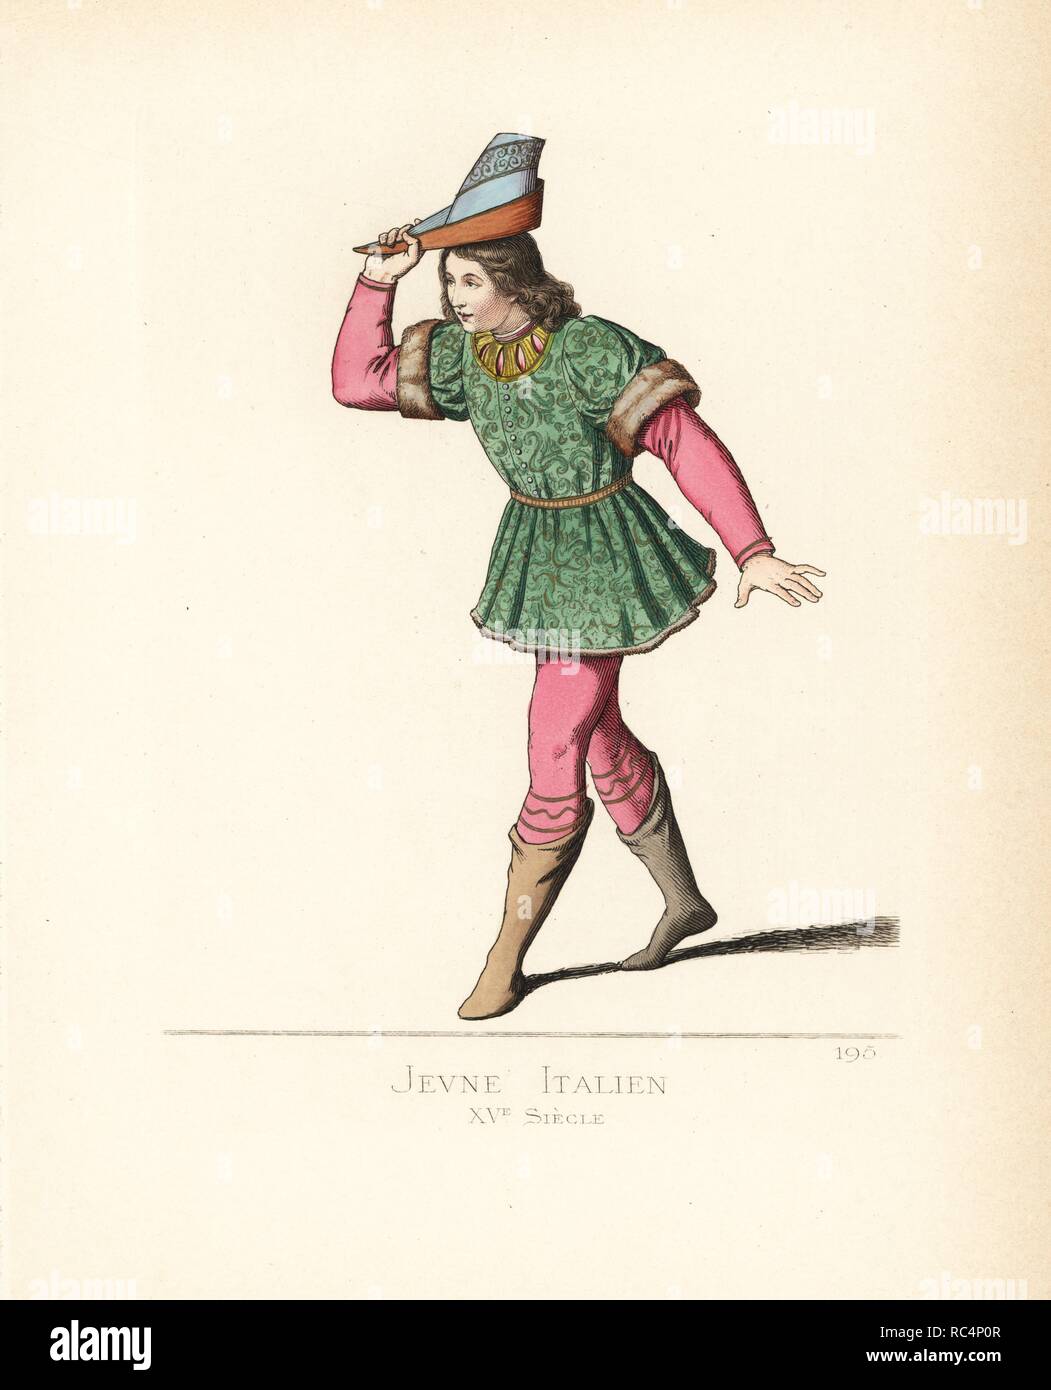 Young Italian man doffing his hat in salute, 15th century. He wears a violet peaked cap, a crimson velvet doublet, green damask tunic with fur trim, crimson stockings and leather boots. From a miniature in the Duke of Urbino's Bible in the Vatican library. Handcoloured illustration drawn and lithographed by Paul Mercuri with text by Camille Bonnard from 'Historical Costumes from the 12th to 15th Centuries,' Levy Fils, Paris, 1861. Stock Photo